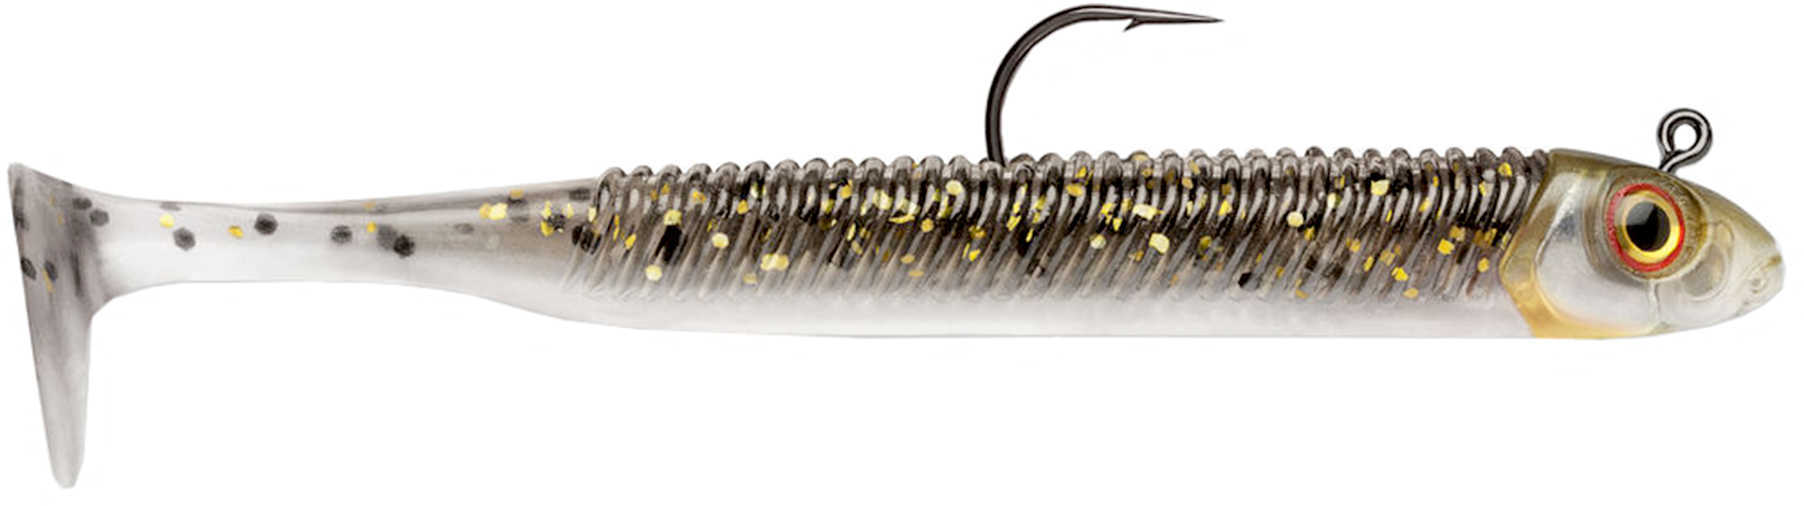 Storm 360GT Searchbait Lure 4.5-Inches 1/4 oz Weight, Volunteer, Per 1 Md: SBM45VT-14J